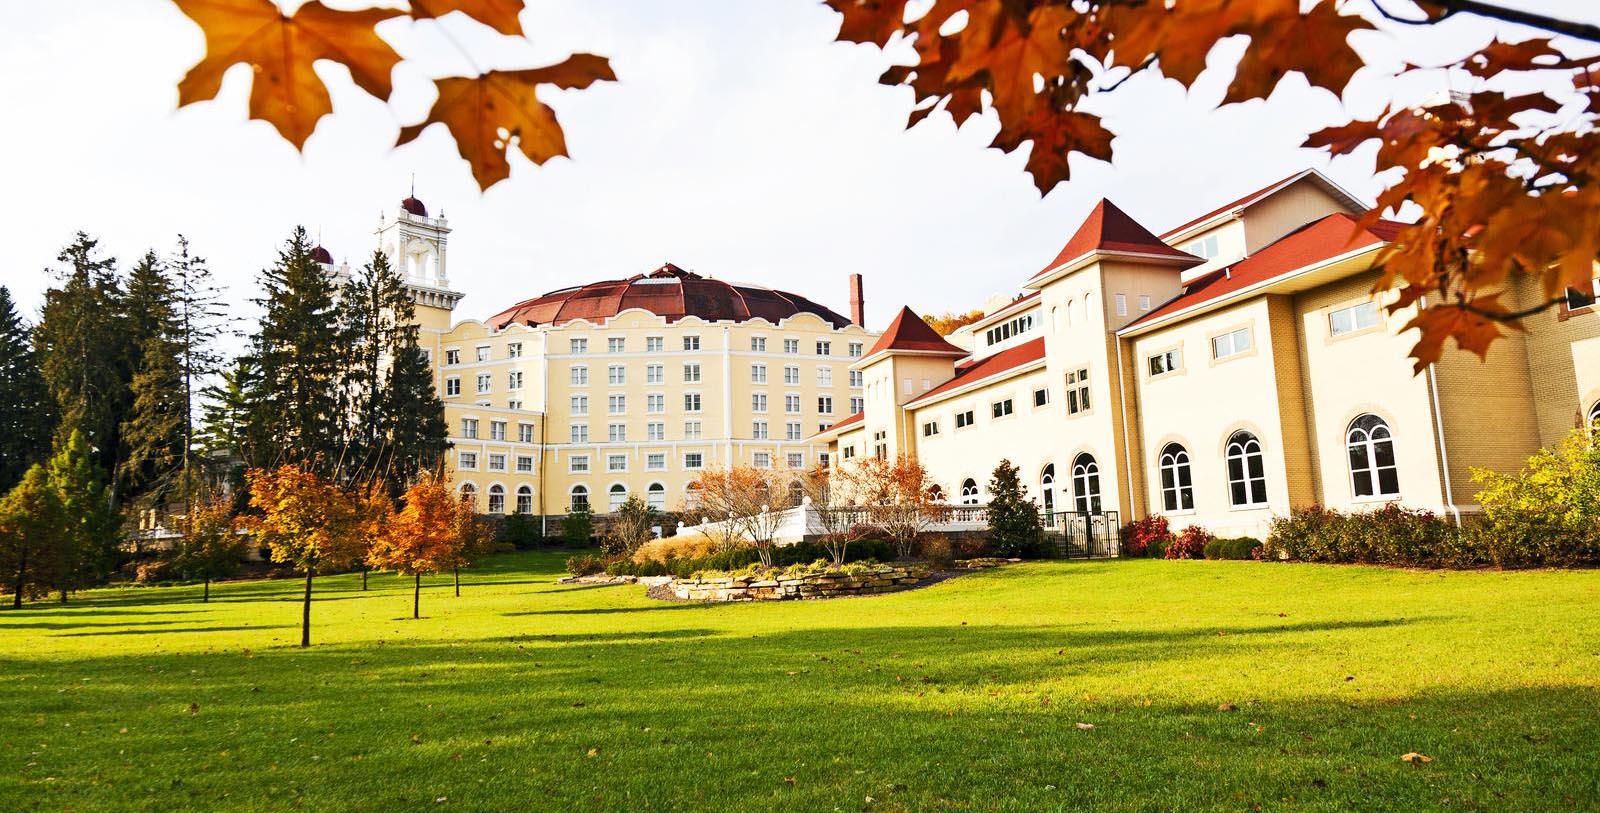 Daytime exterior of West Baden Springs Hotel in Indiana.